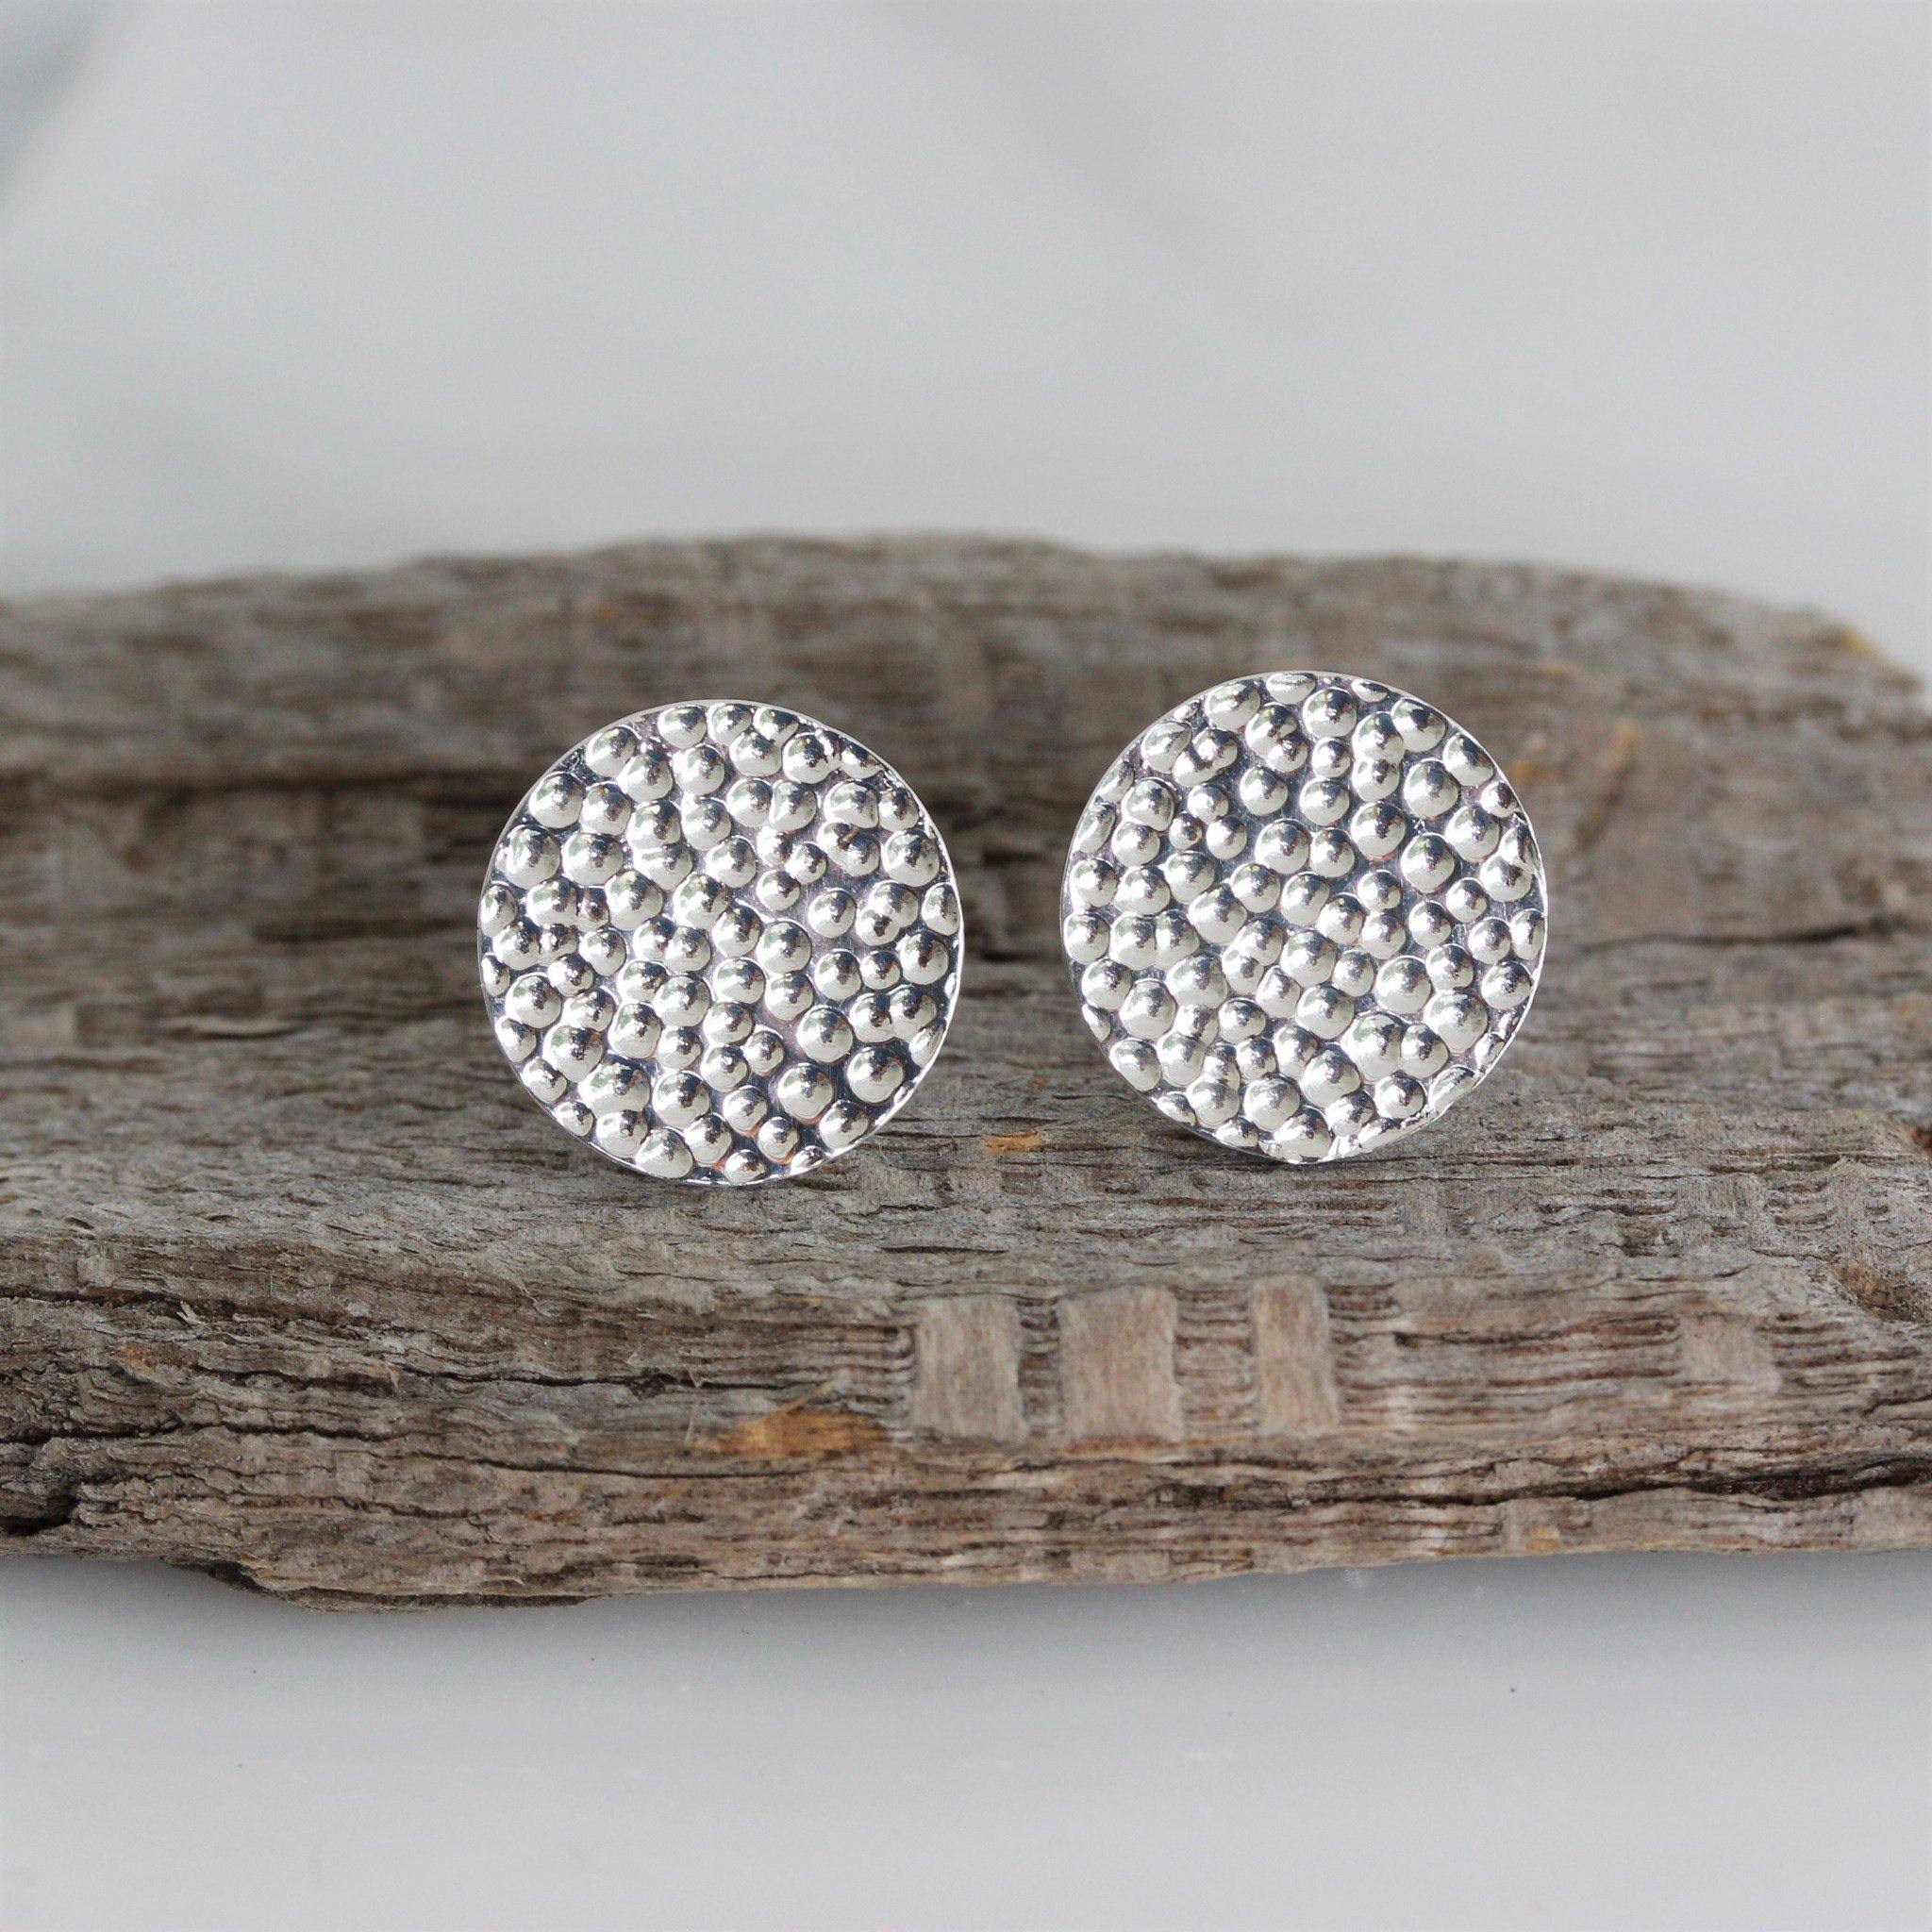 Sterling Silver Big 14mm Round Hammered Beaten Flat Disc Stud Earrings - STERLING SILVER DESIGNS